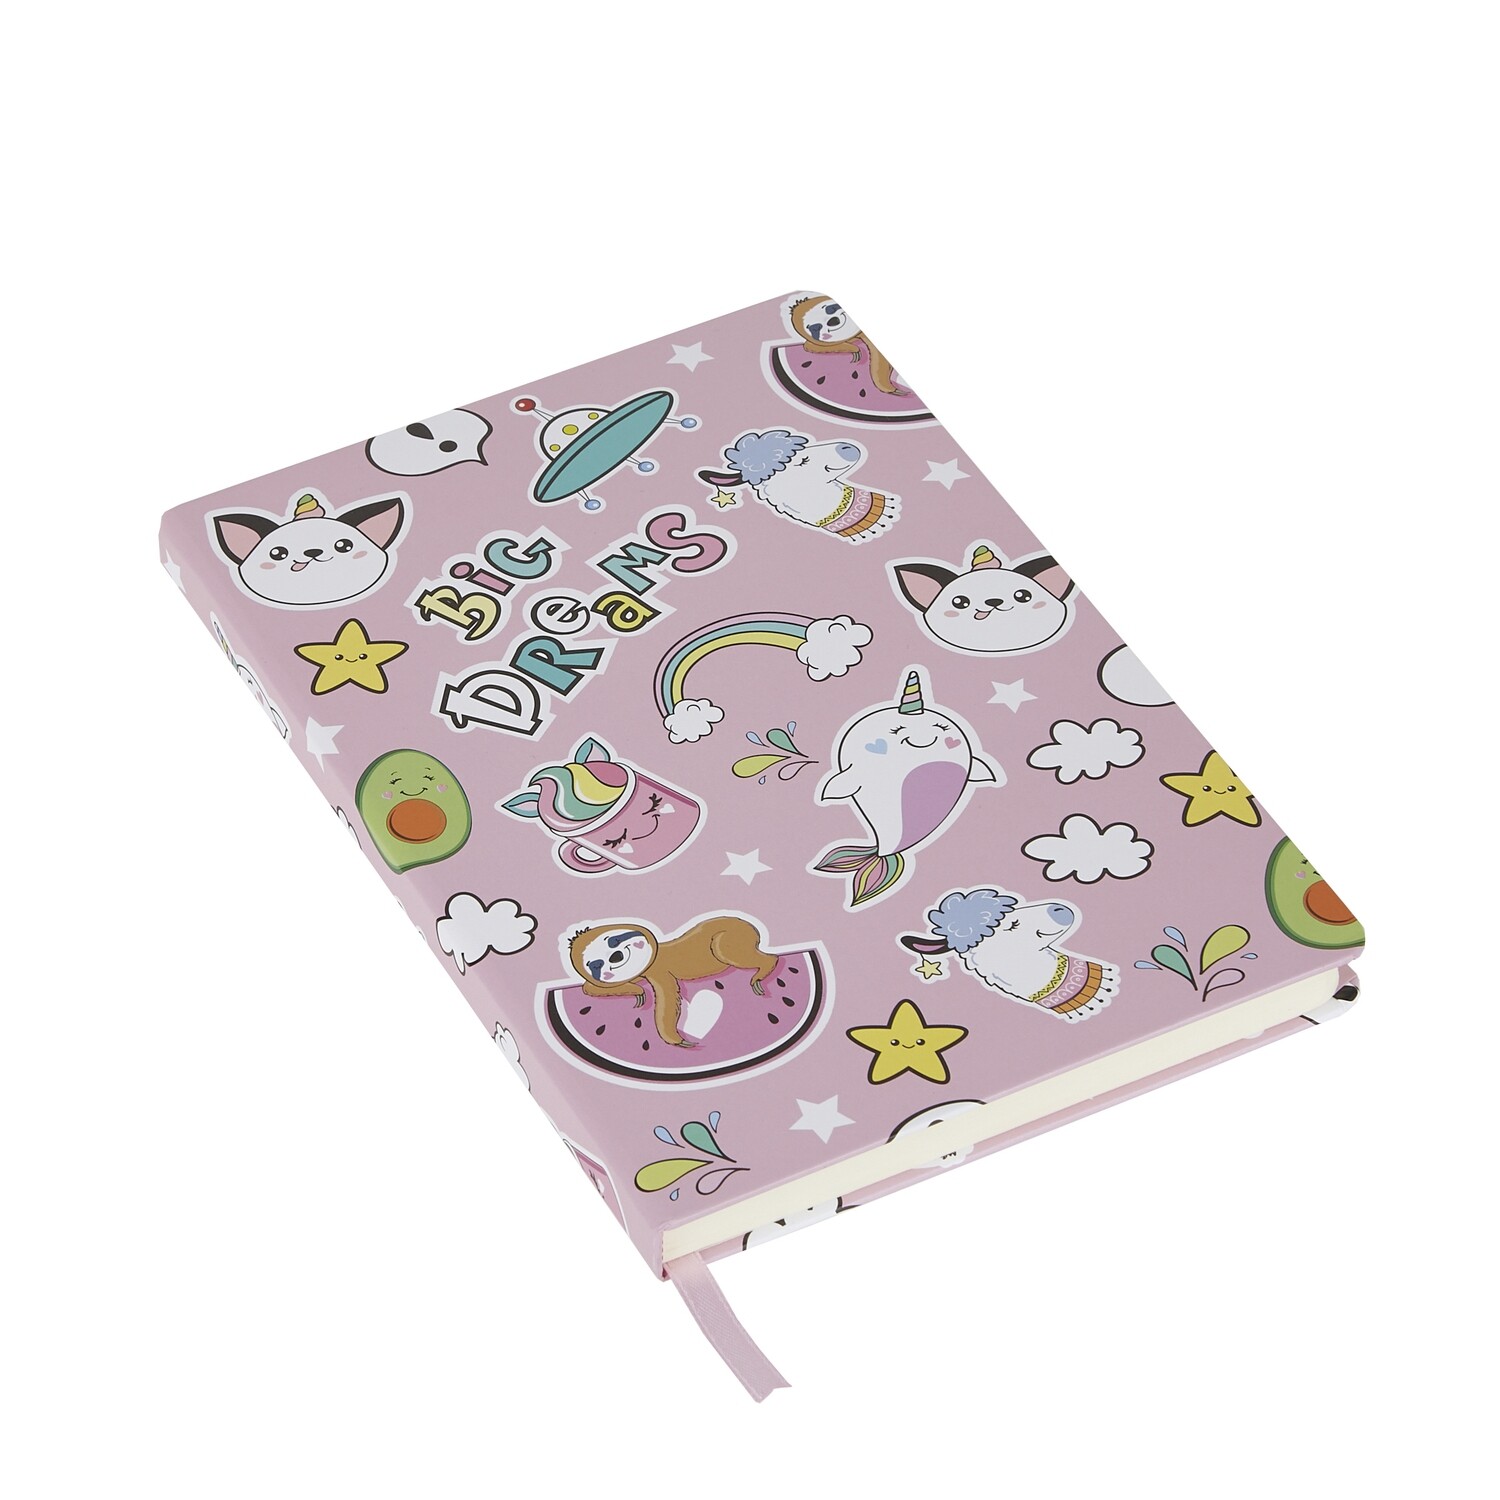 Magic Party - Hardbound Lined Journal A5 Notebook